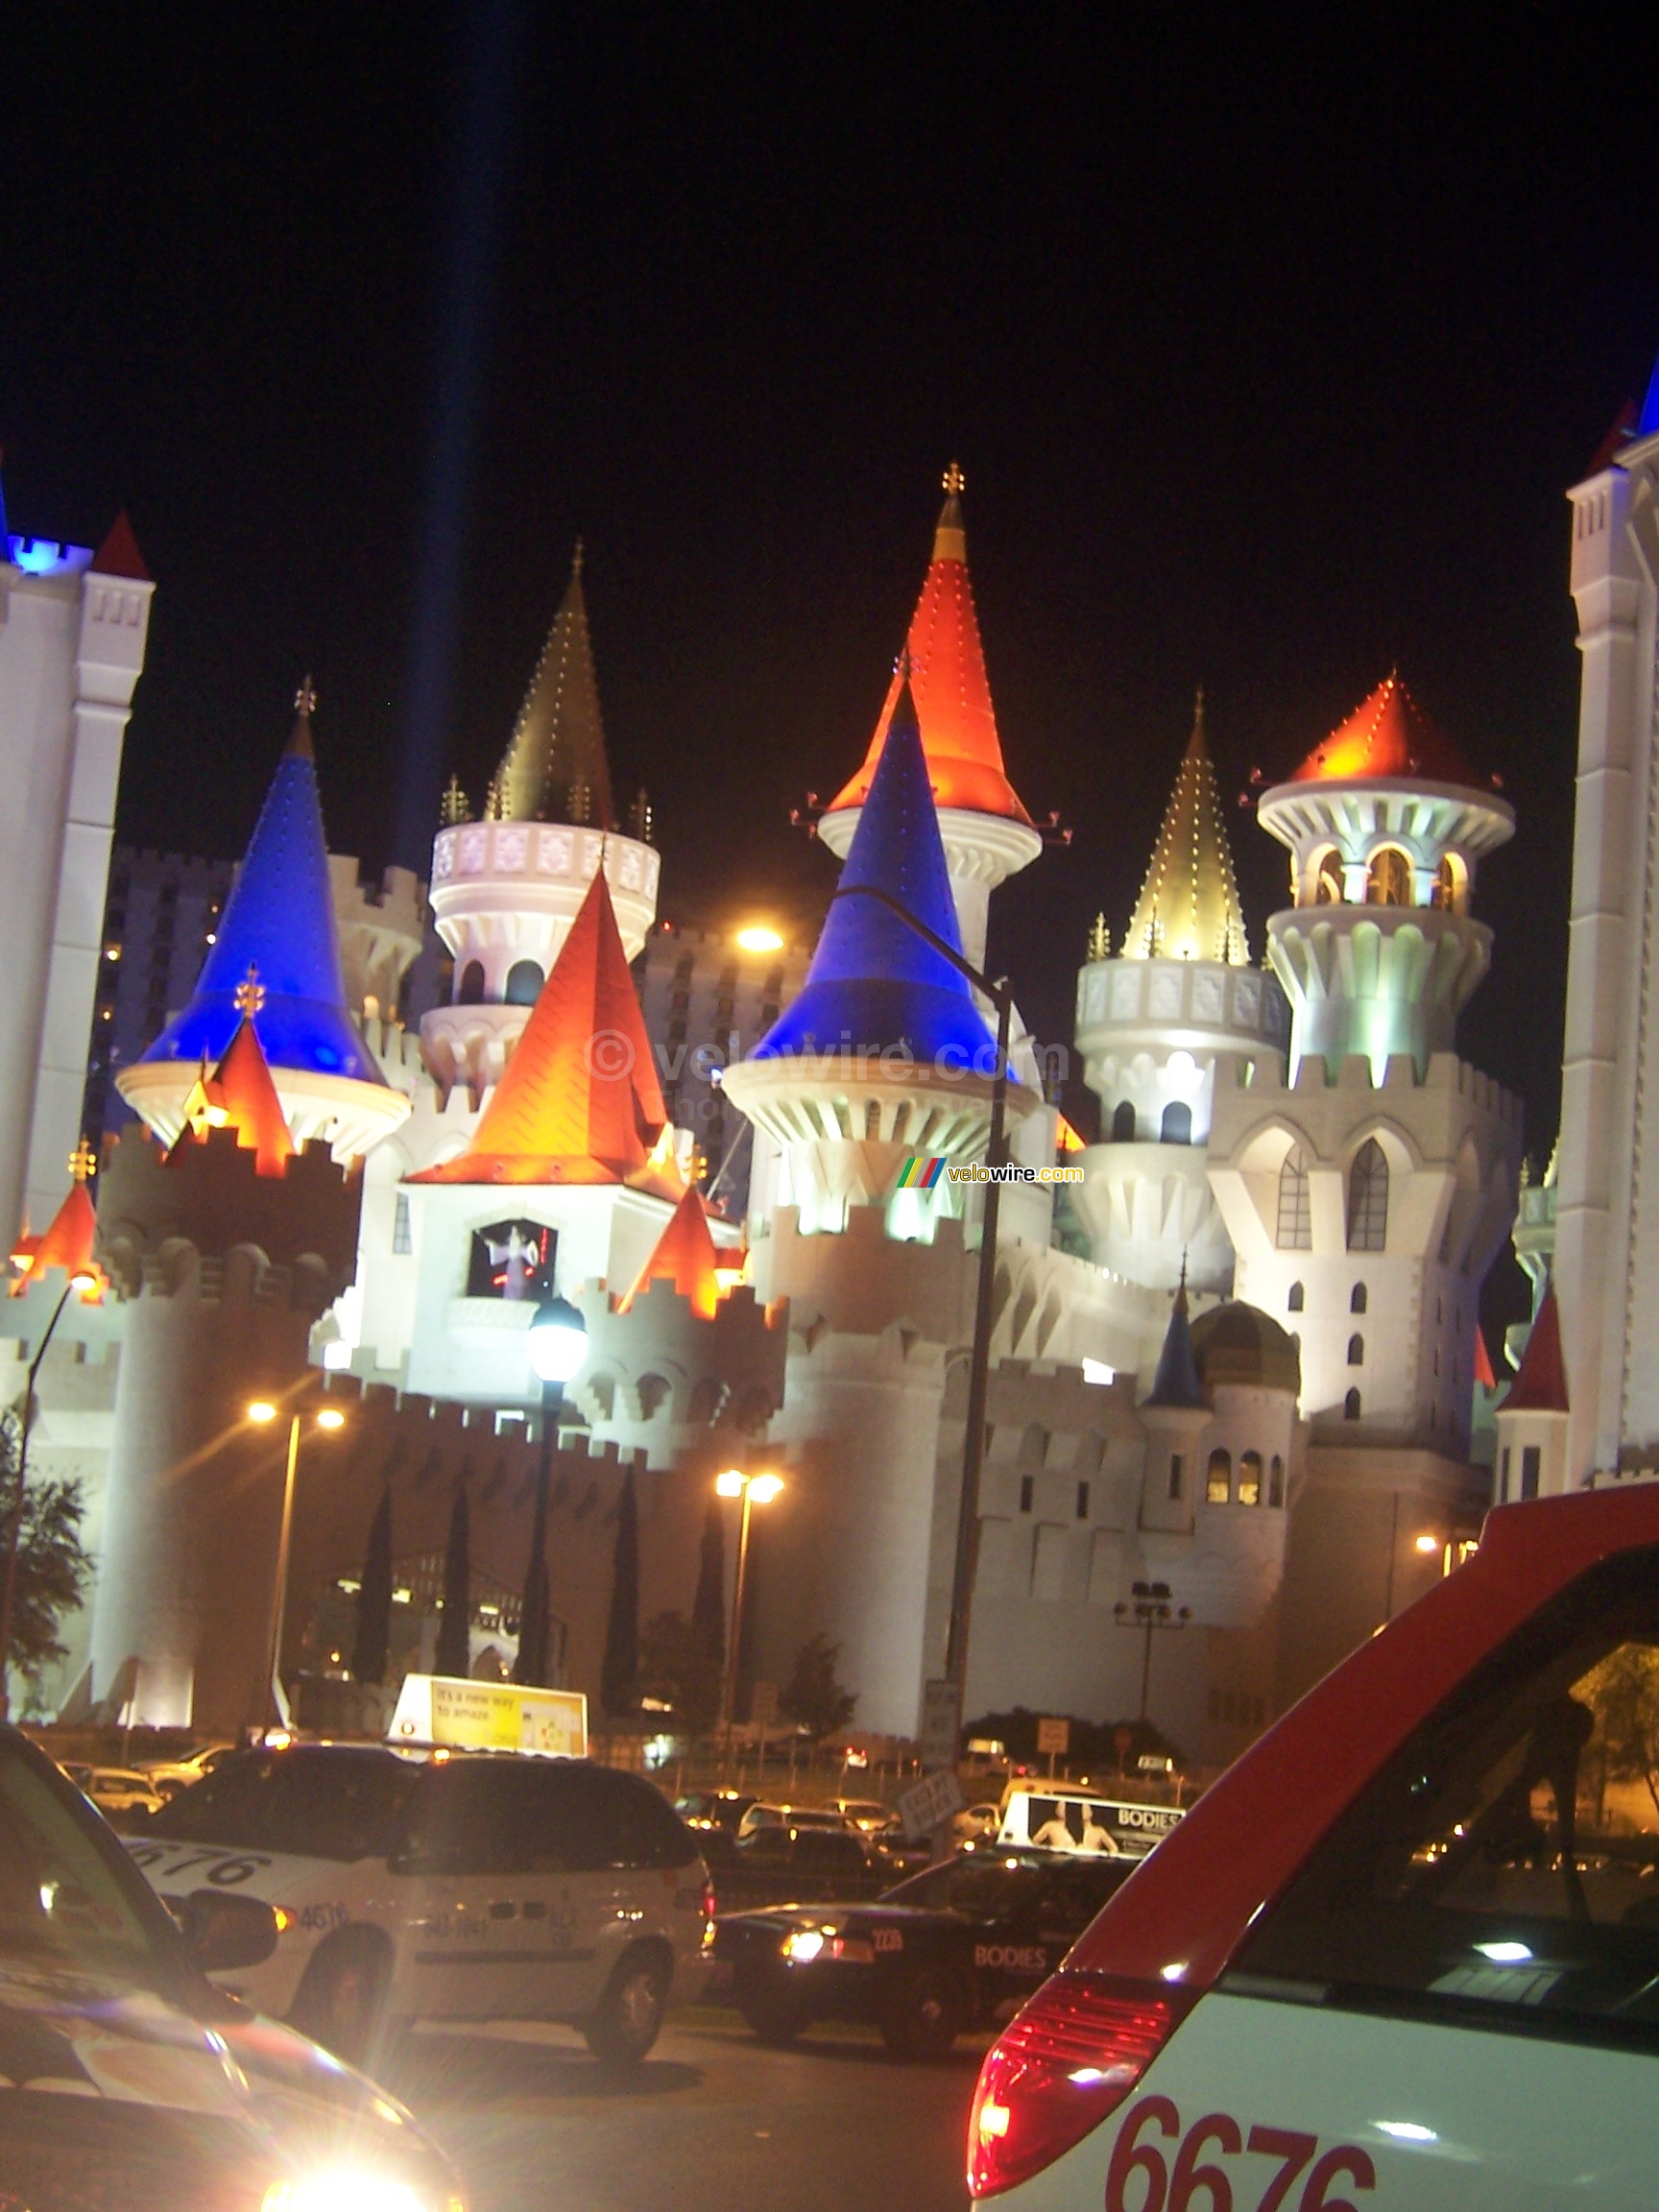 The Excalibur Hotel (by night)